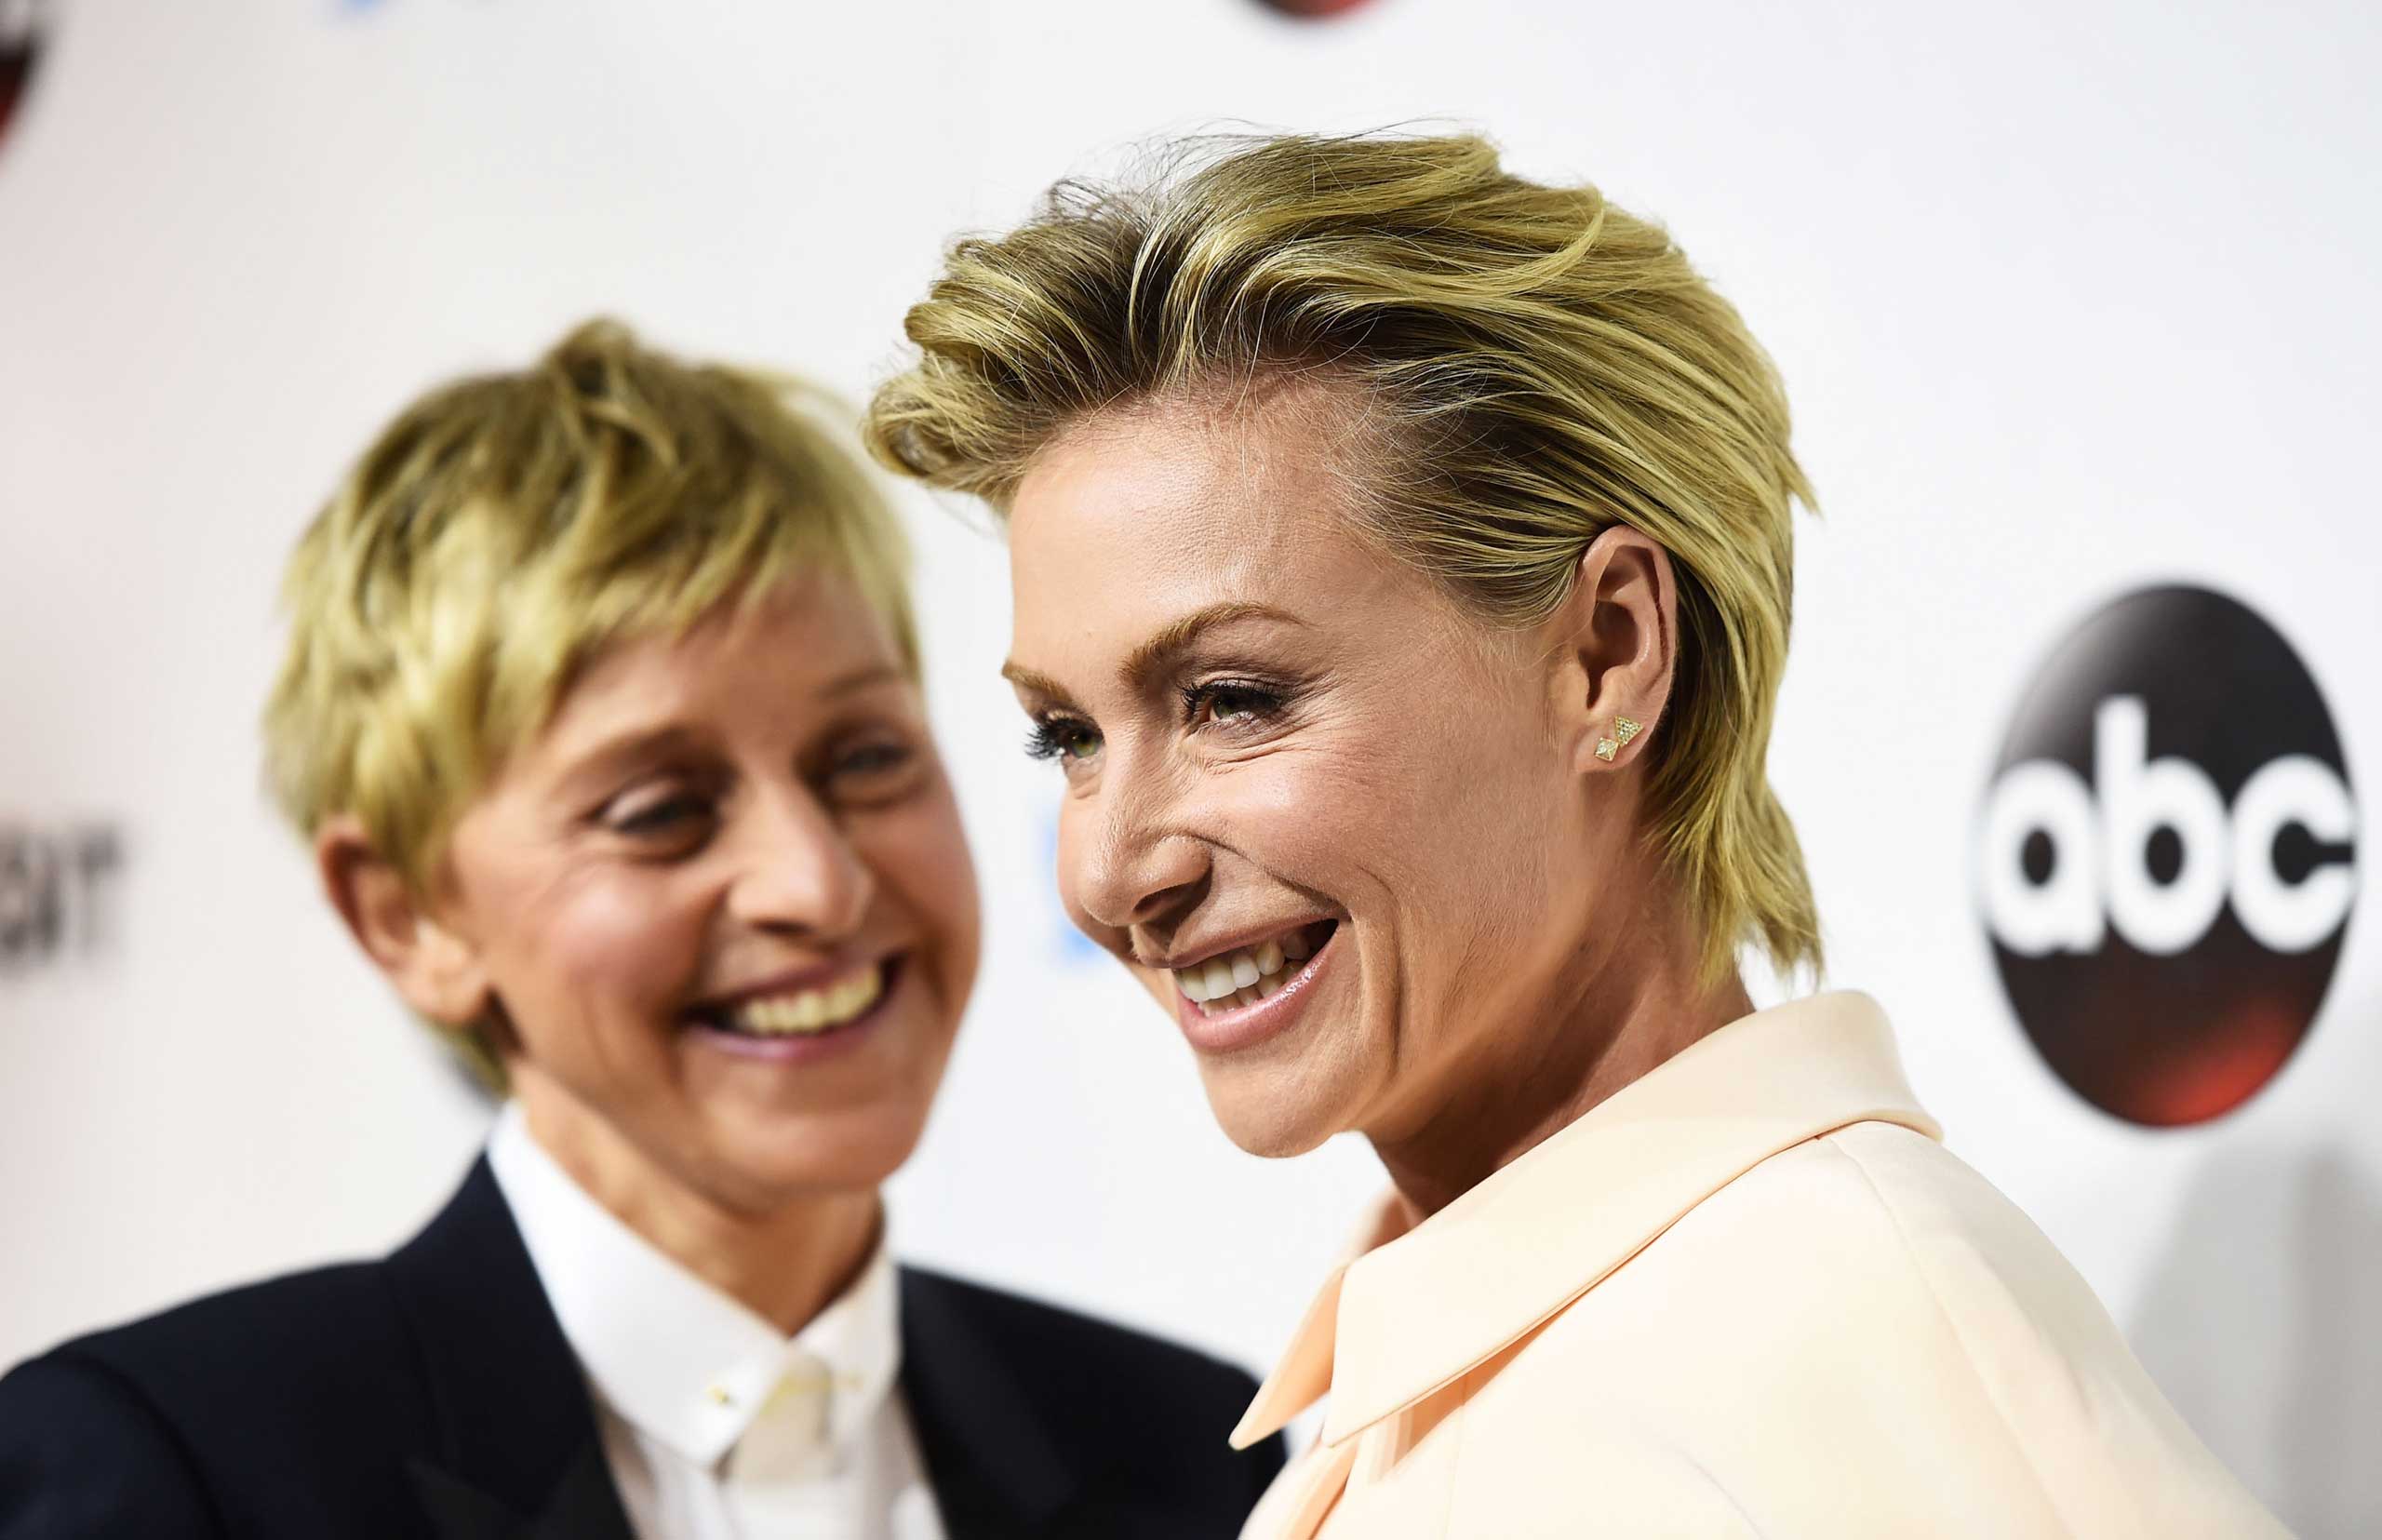 DeGeneres (L) and actress Portia de Rossi arrive at the #TGIT Premiere Event hosted by Twitter at Palihouse Holloway in West Hollywood, Calif. on Sept. 20, 2014. (Amanda Edwards—WireImage/Getty Images)